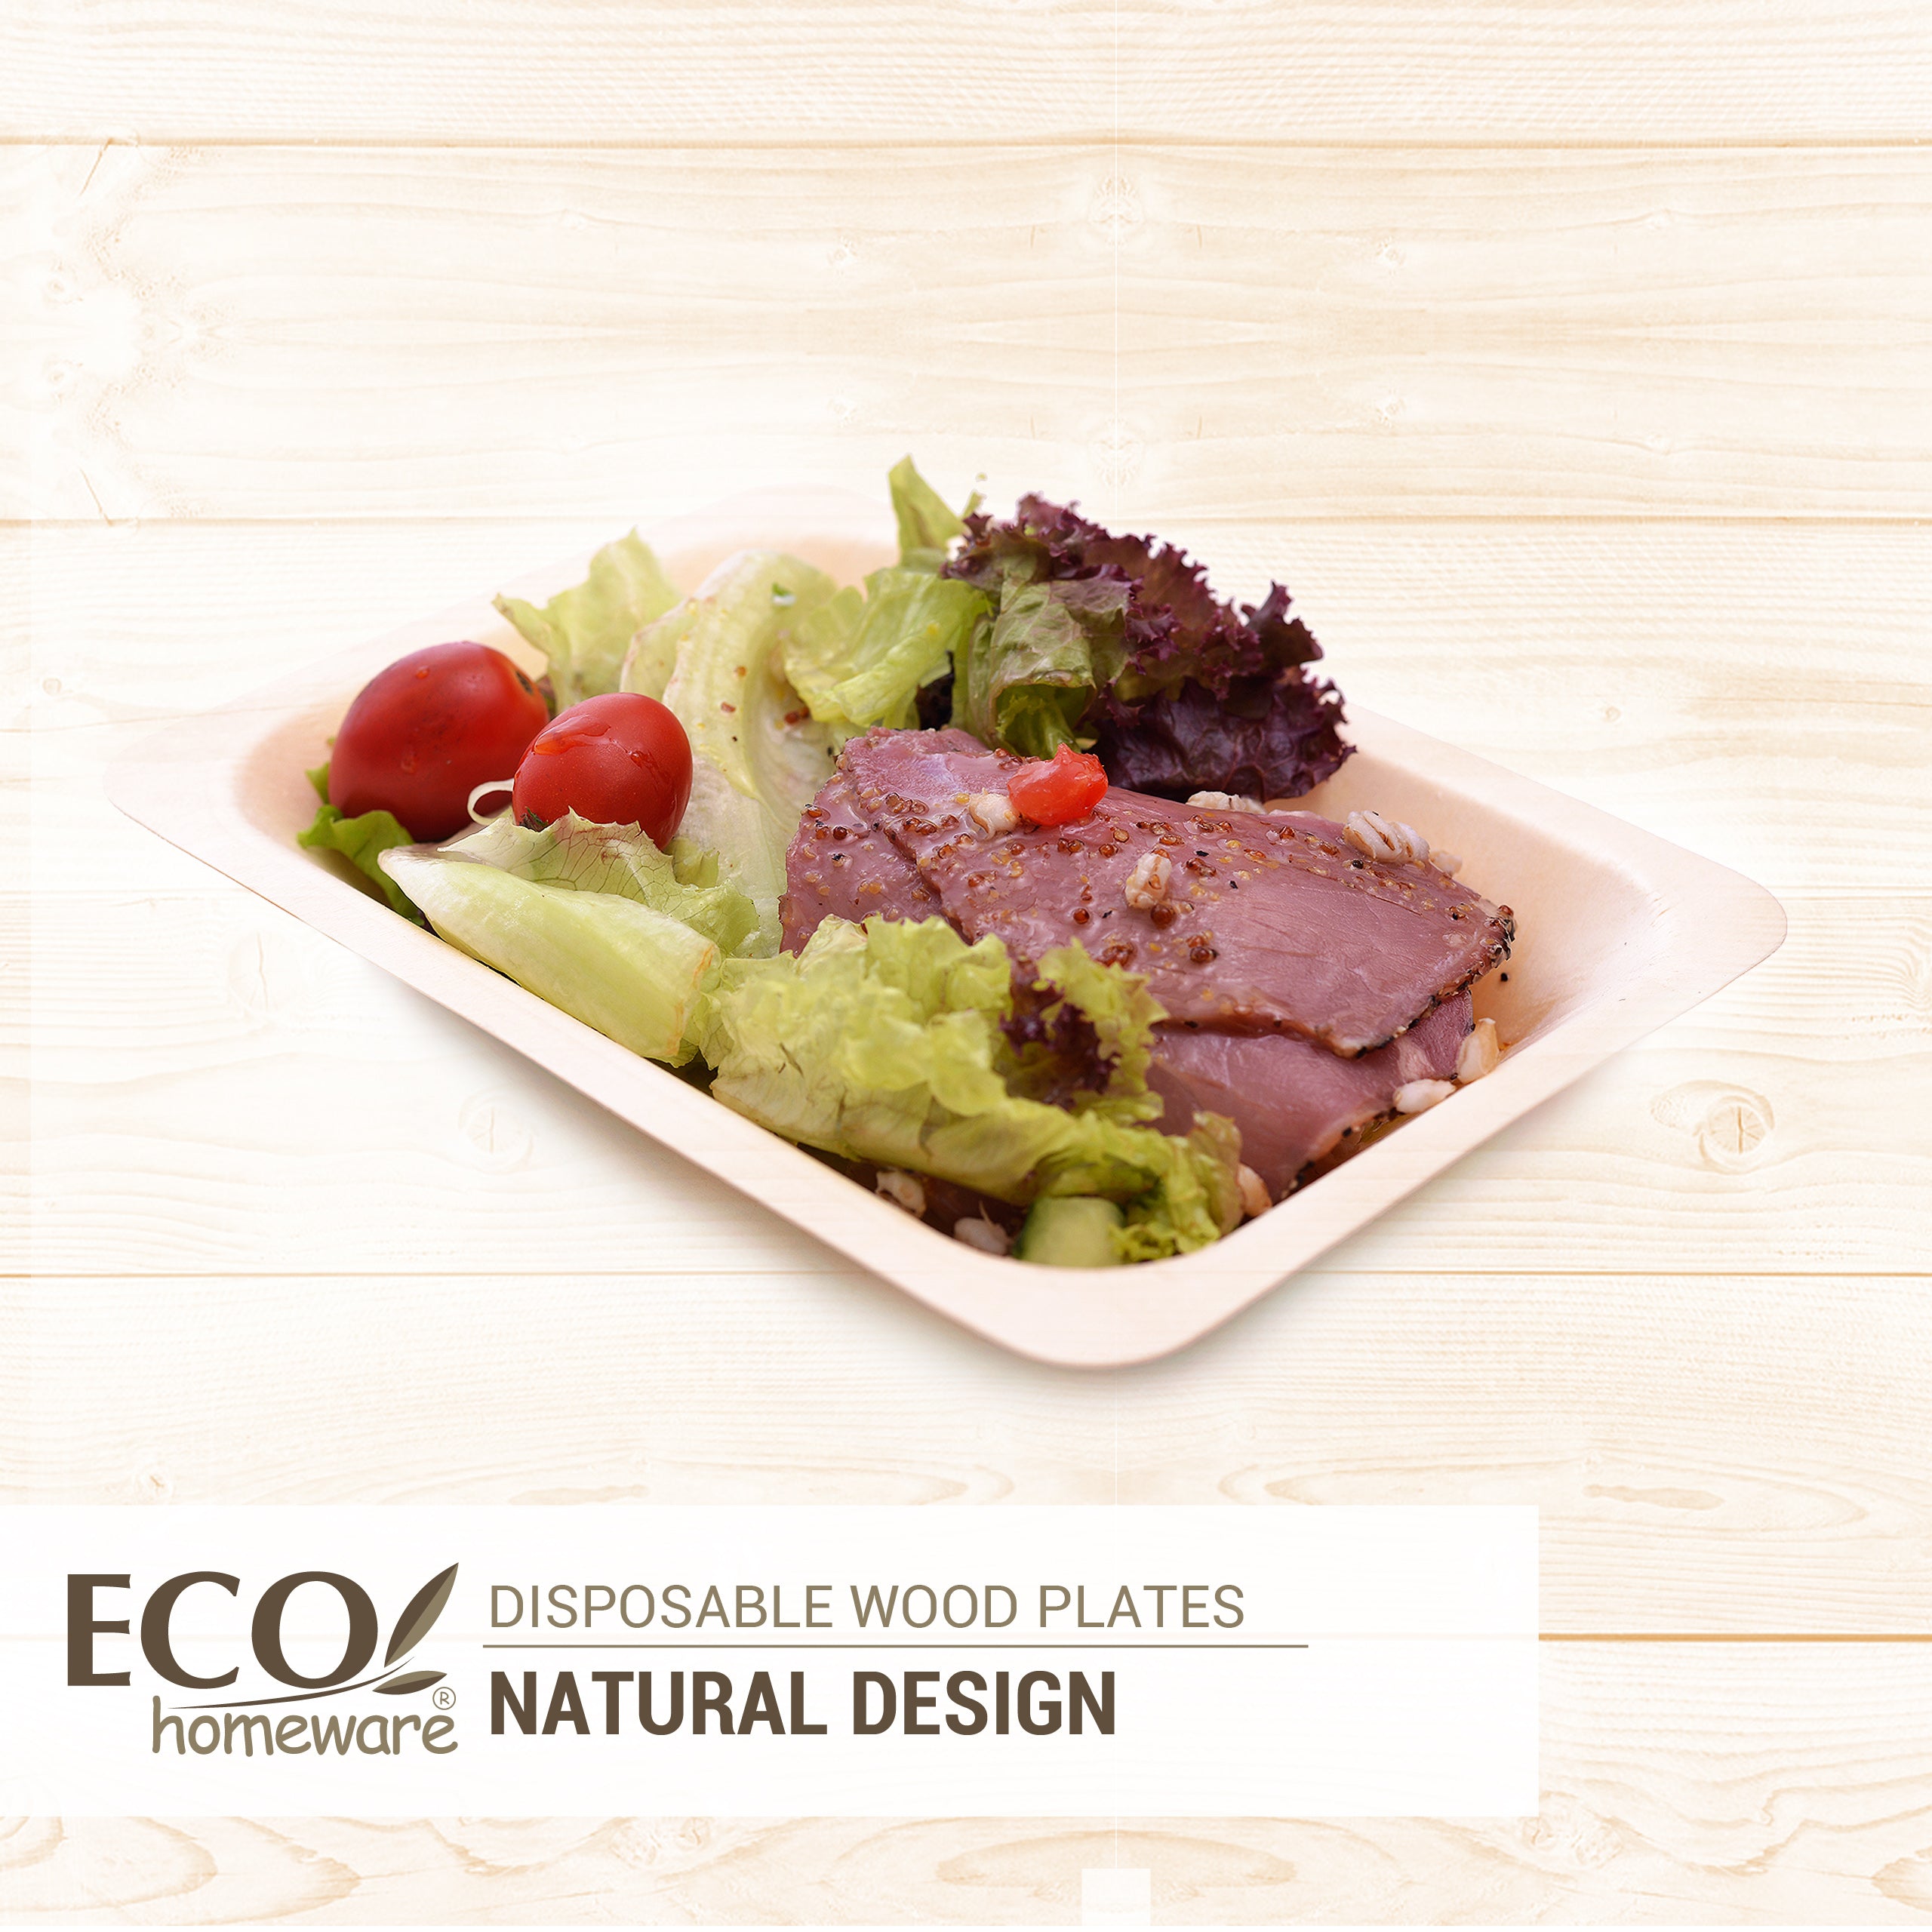 Salad with ham using eco homeware disposable wood plates